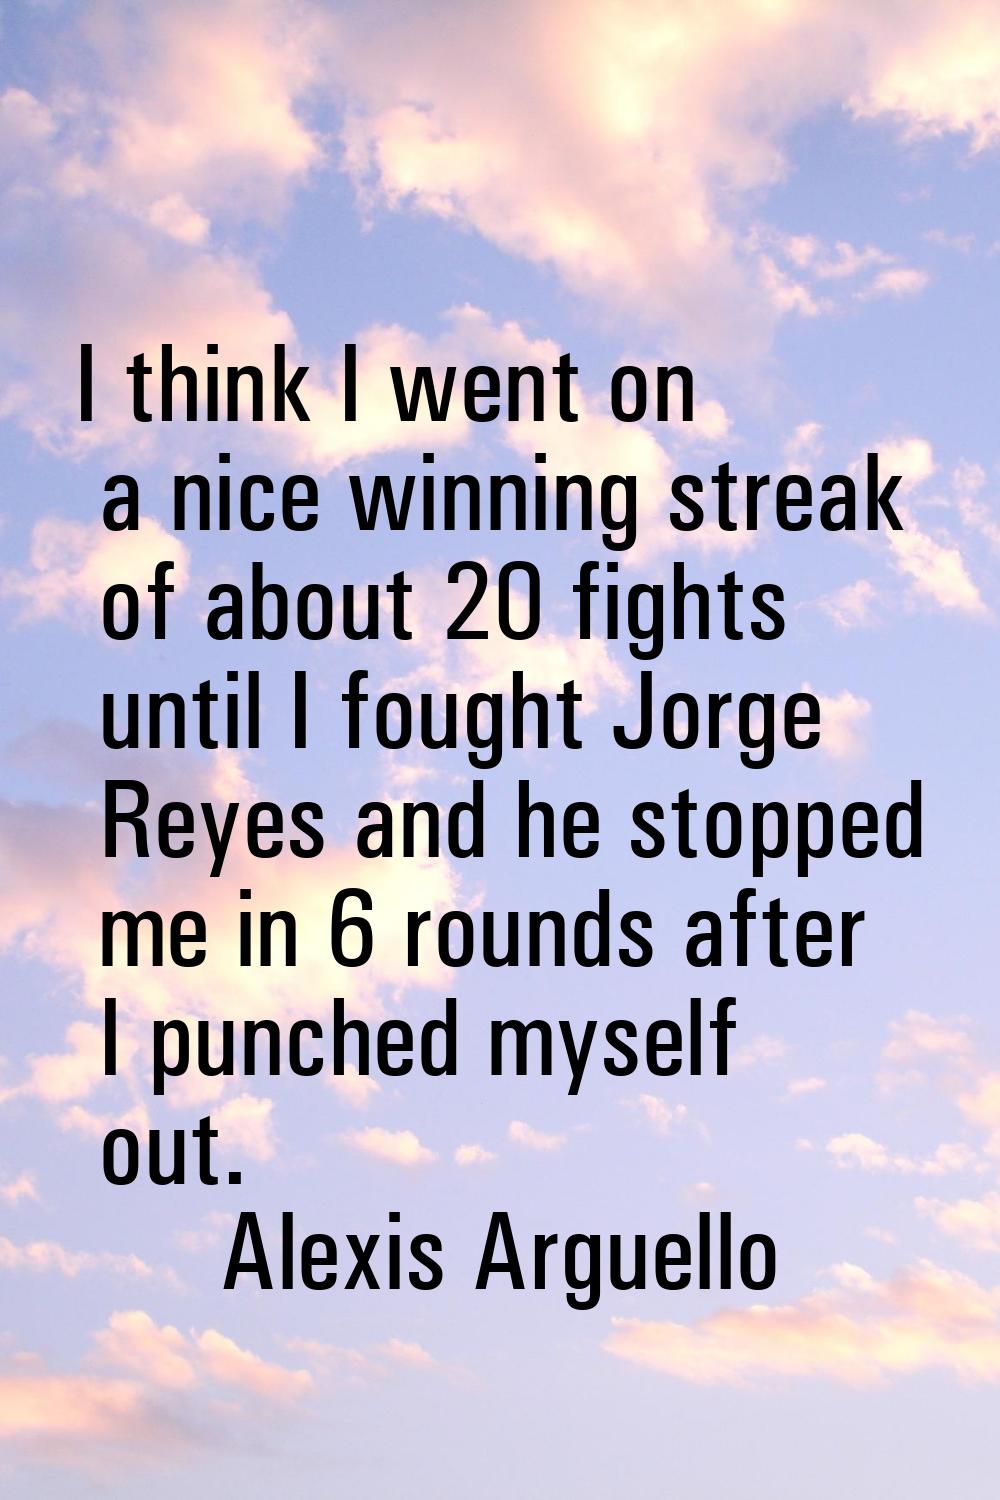 I think I went on a nice winning streak of about 20 fights until I fought Jorge Reyes and he stoppe